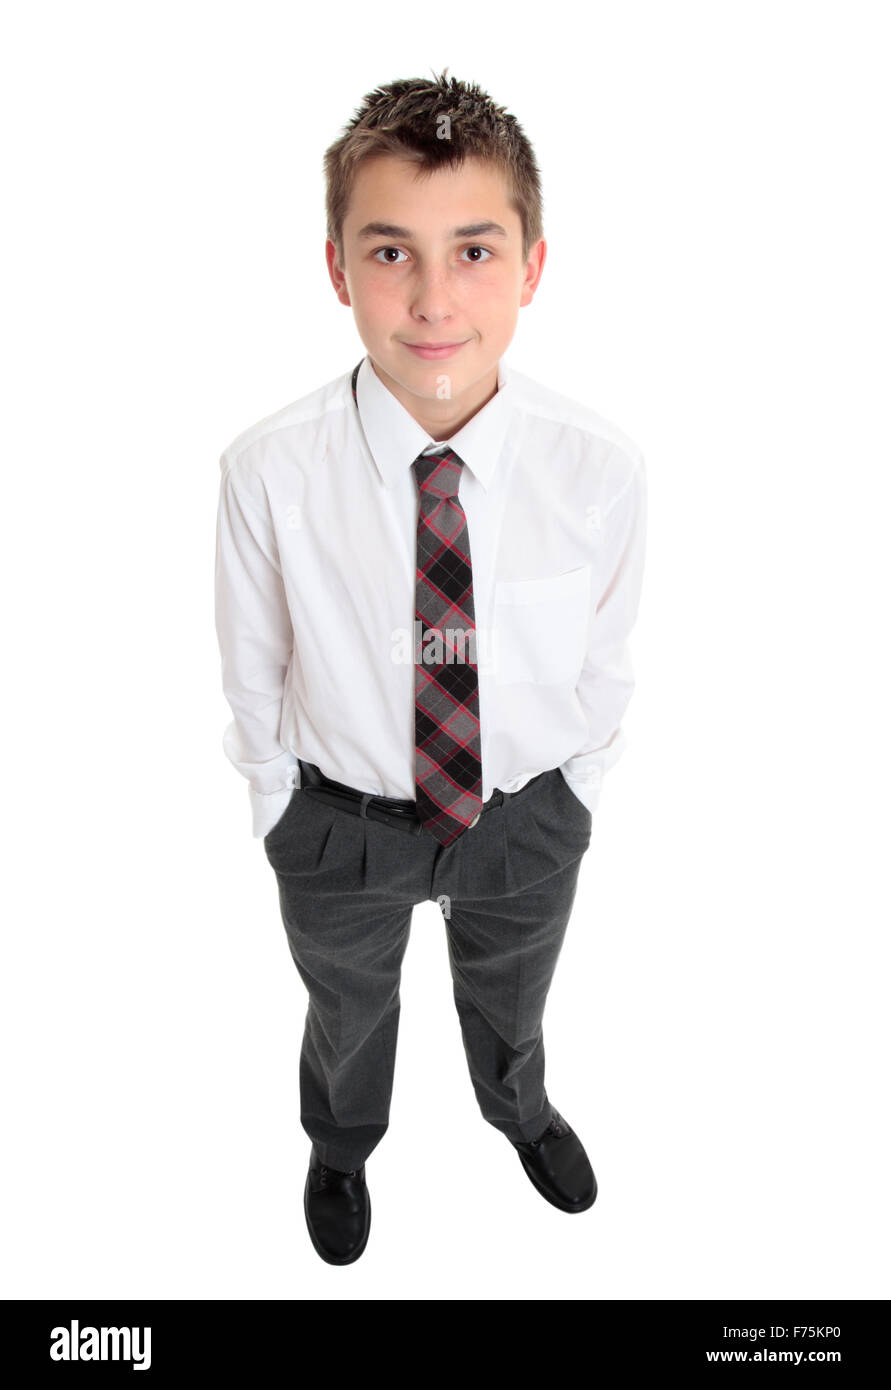 Typical school boy stands in uniform Stock Photo